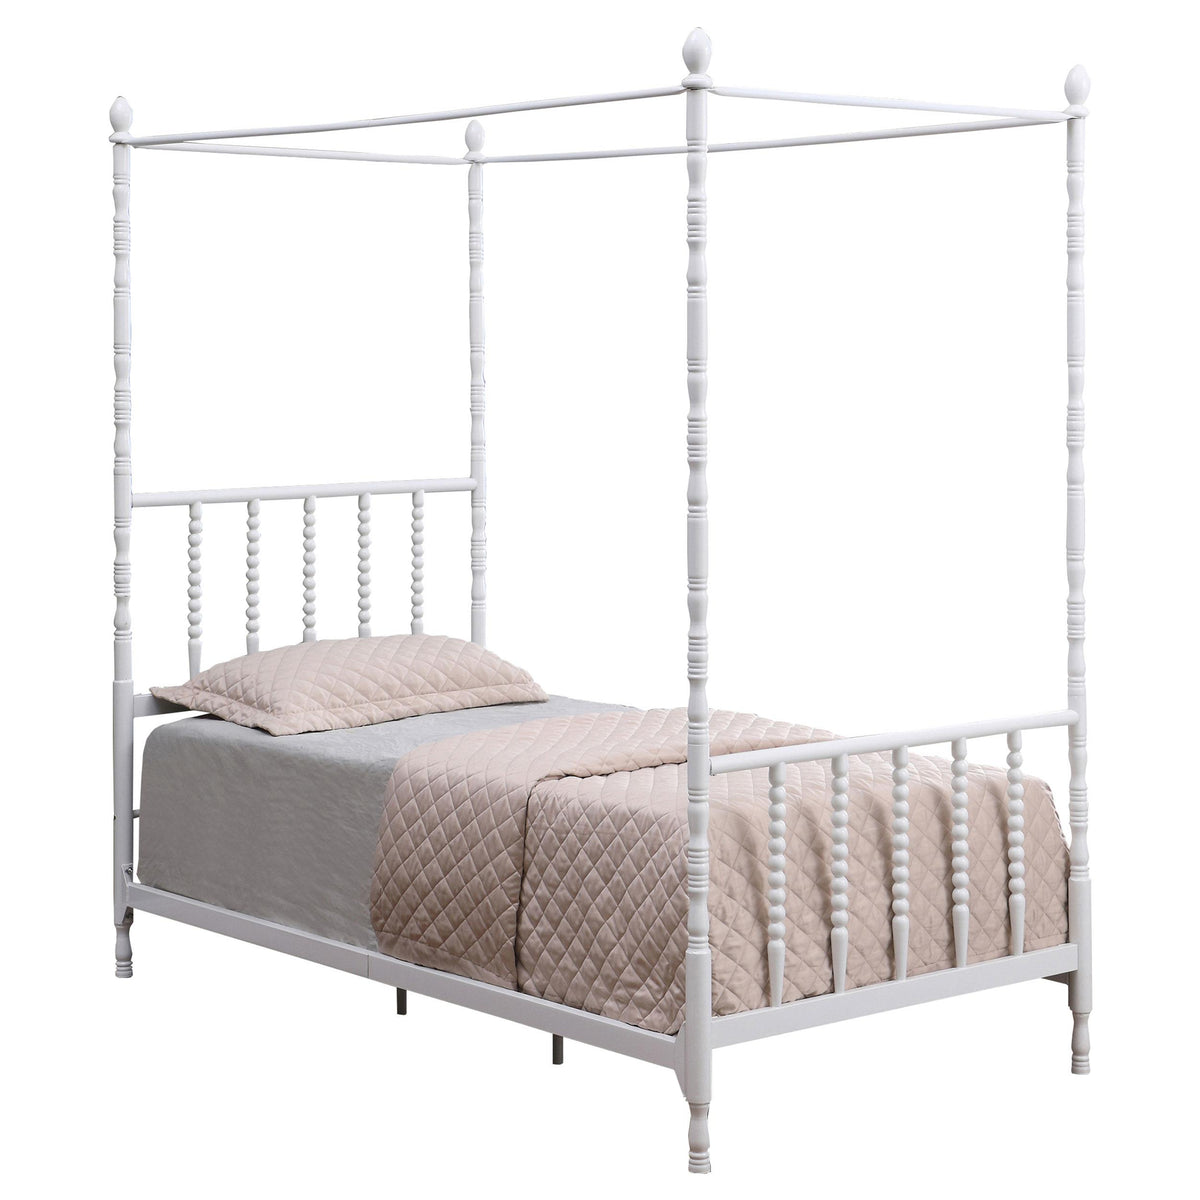 Betony Twin Canopy Bed White  Las Vegas Furniture Stores